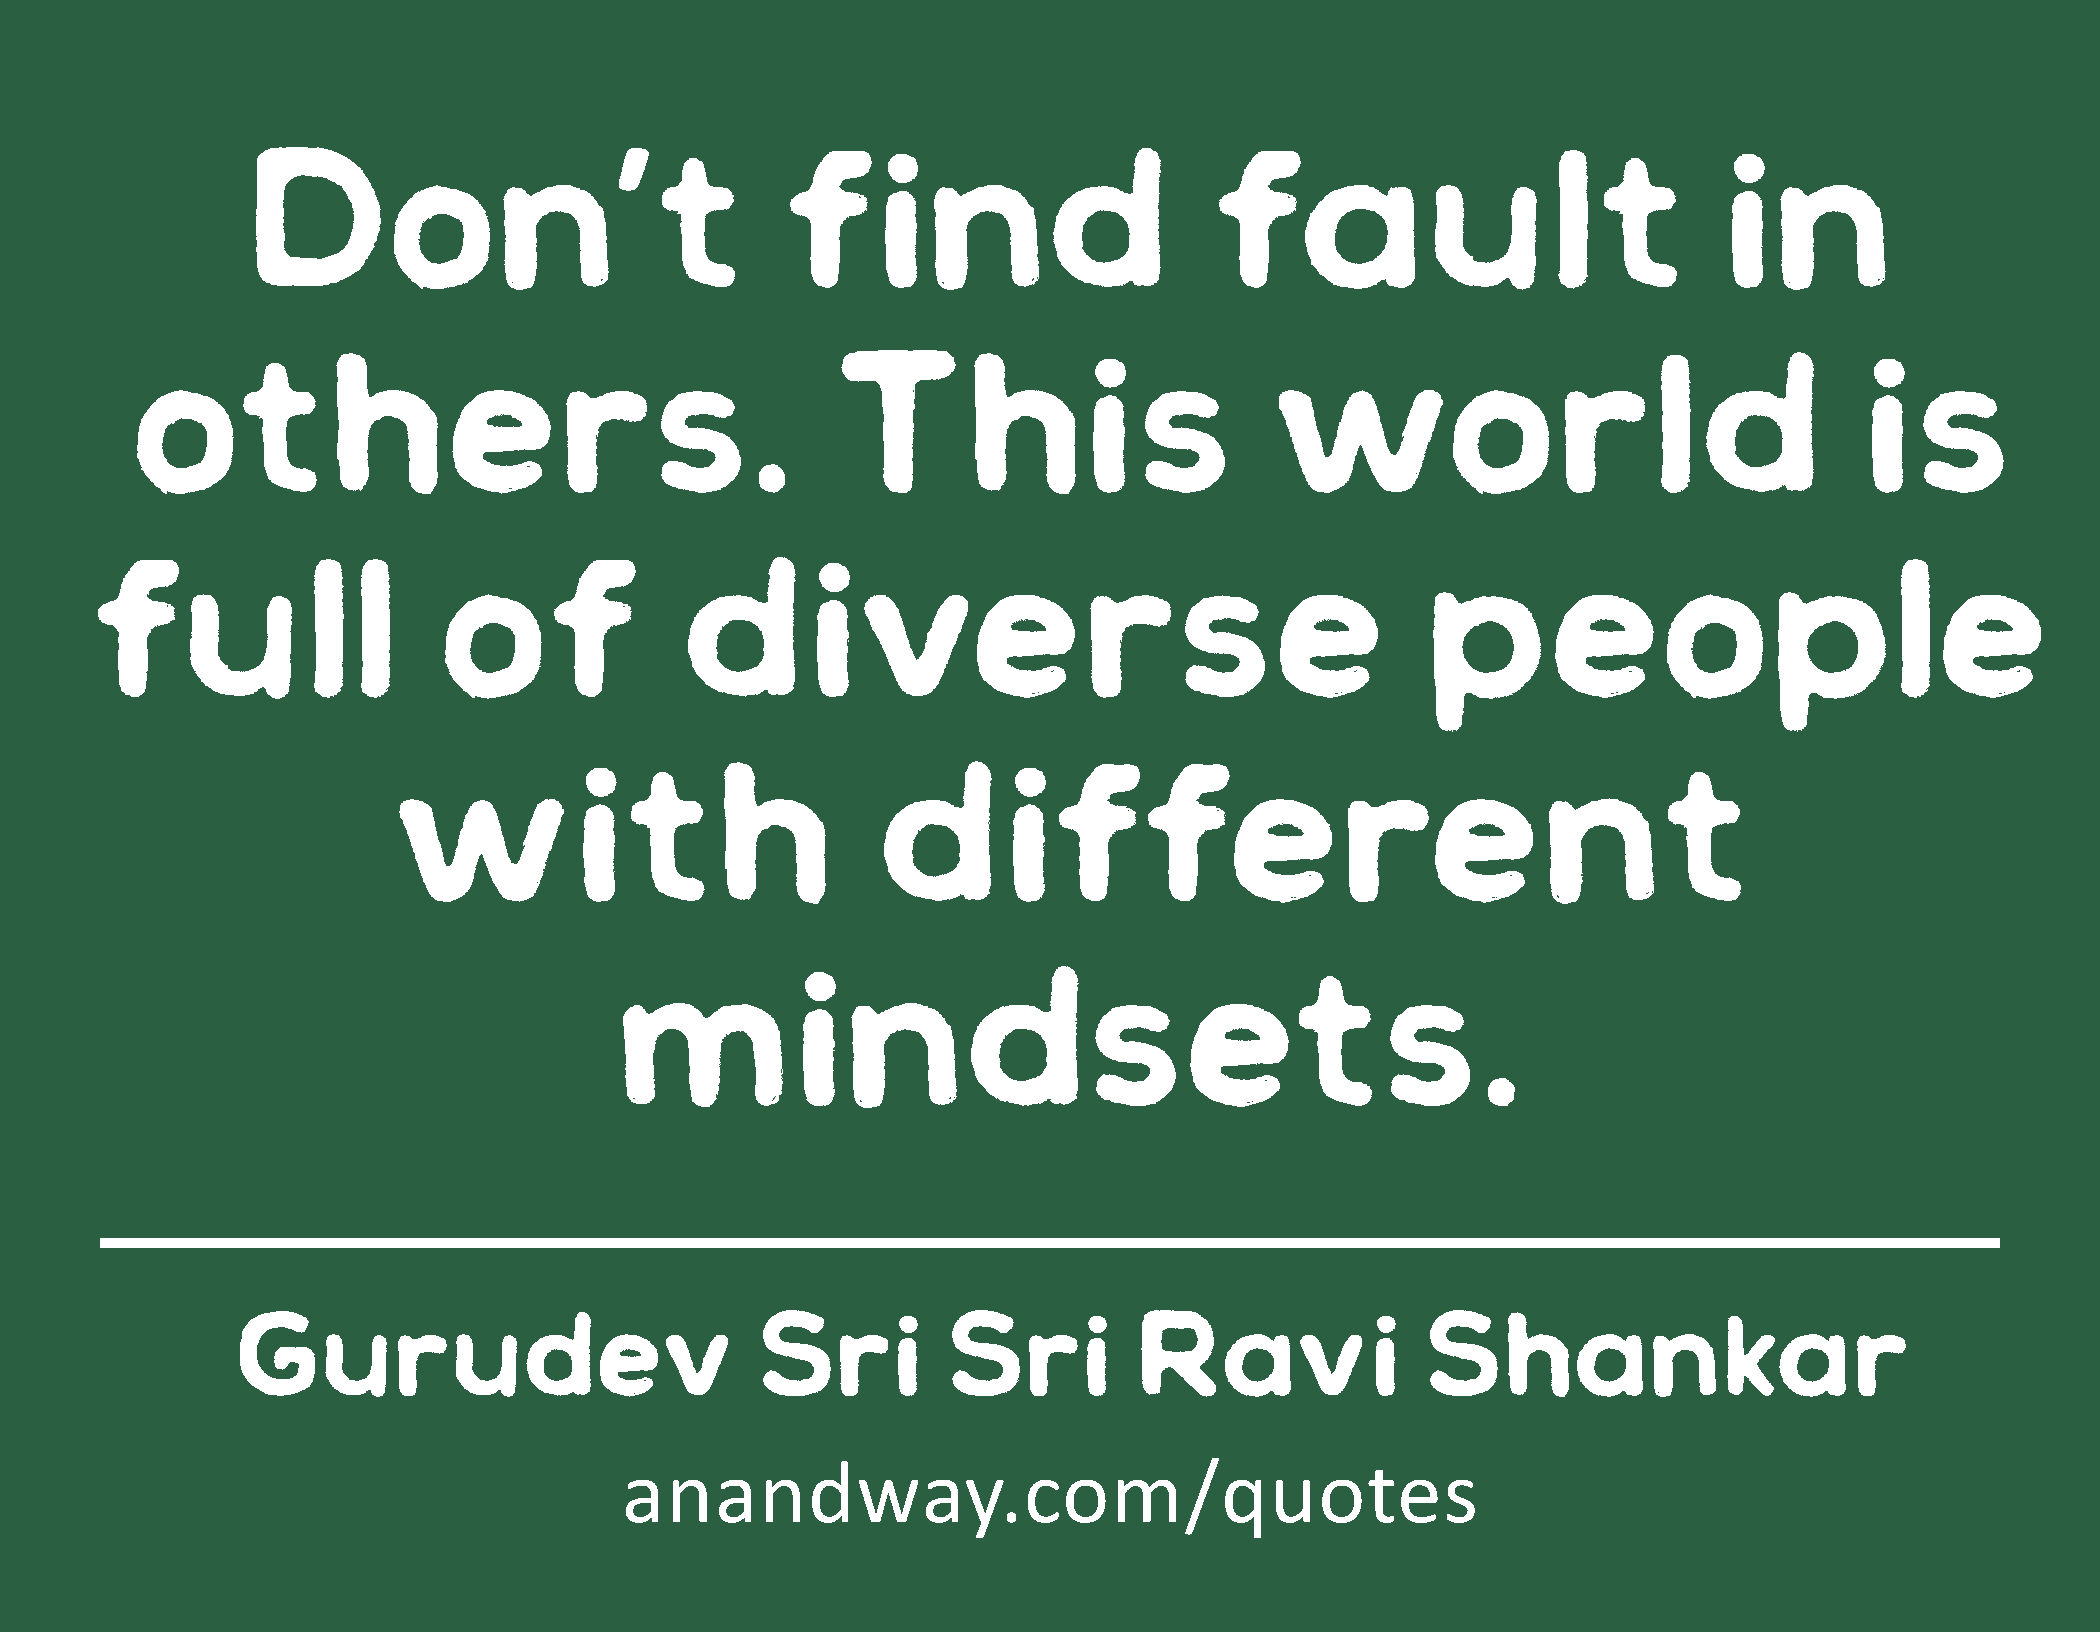 Don’t find fault in others. This world is full of diverse people with different mindsets. 
 -Gurudev Sri Sri Ravi Shankar